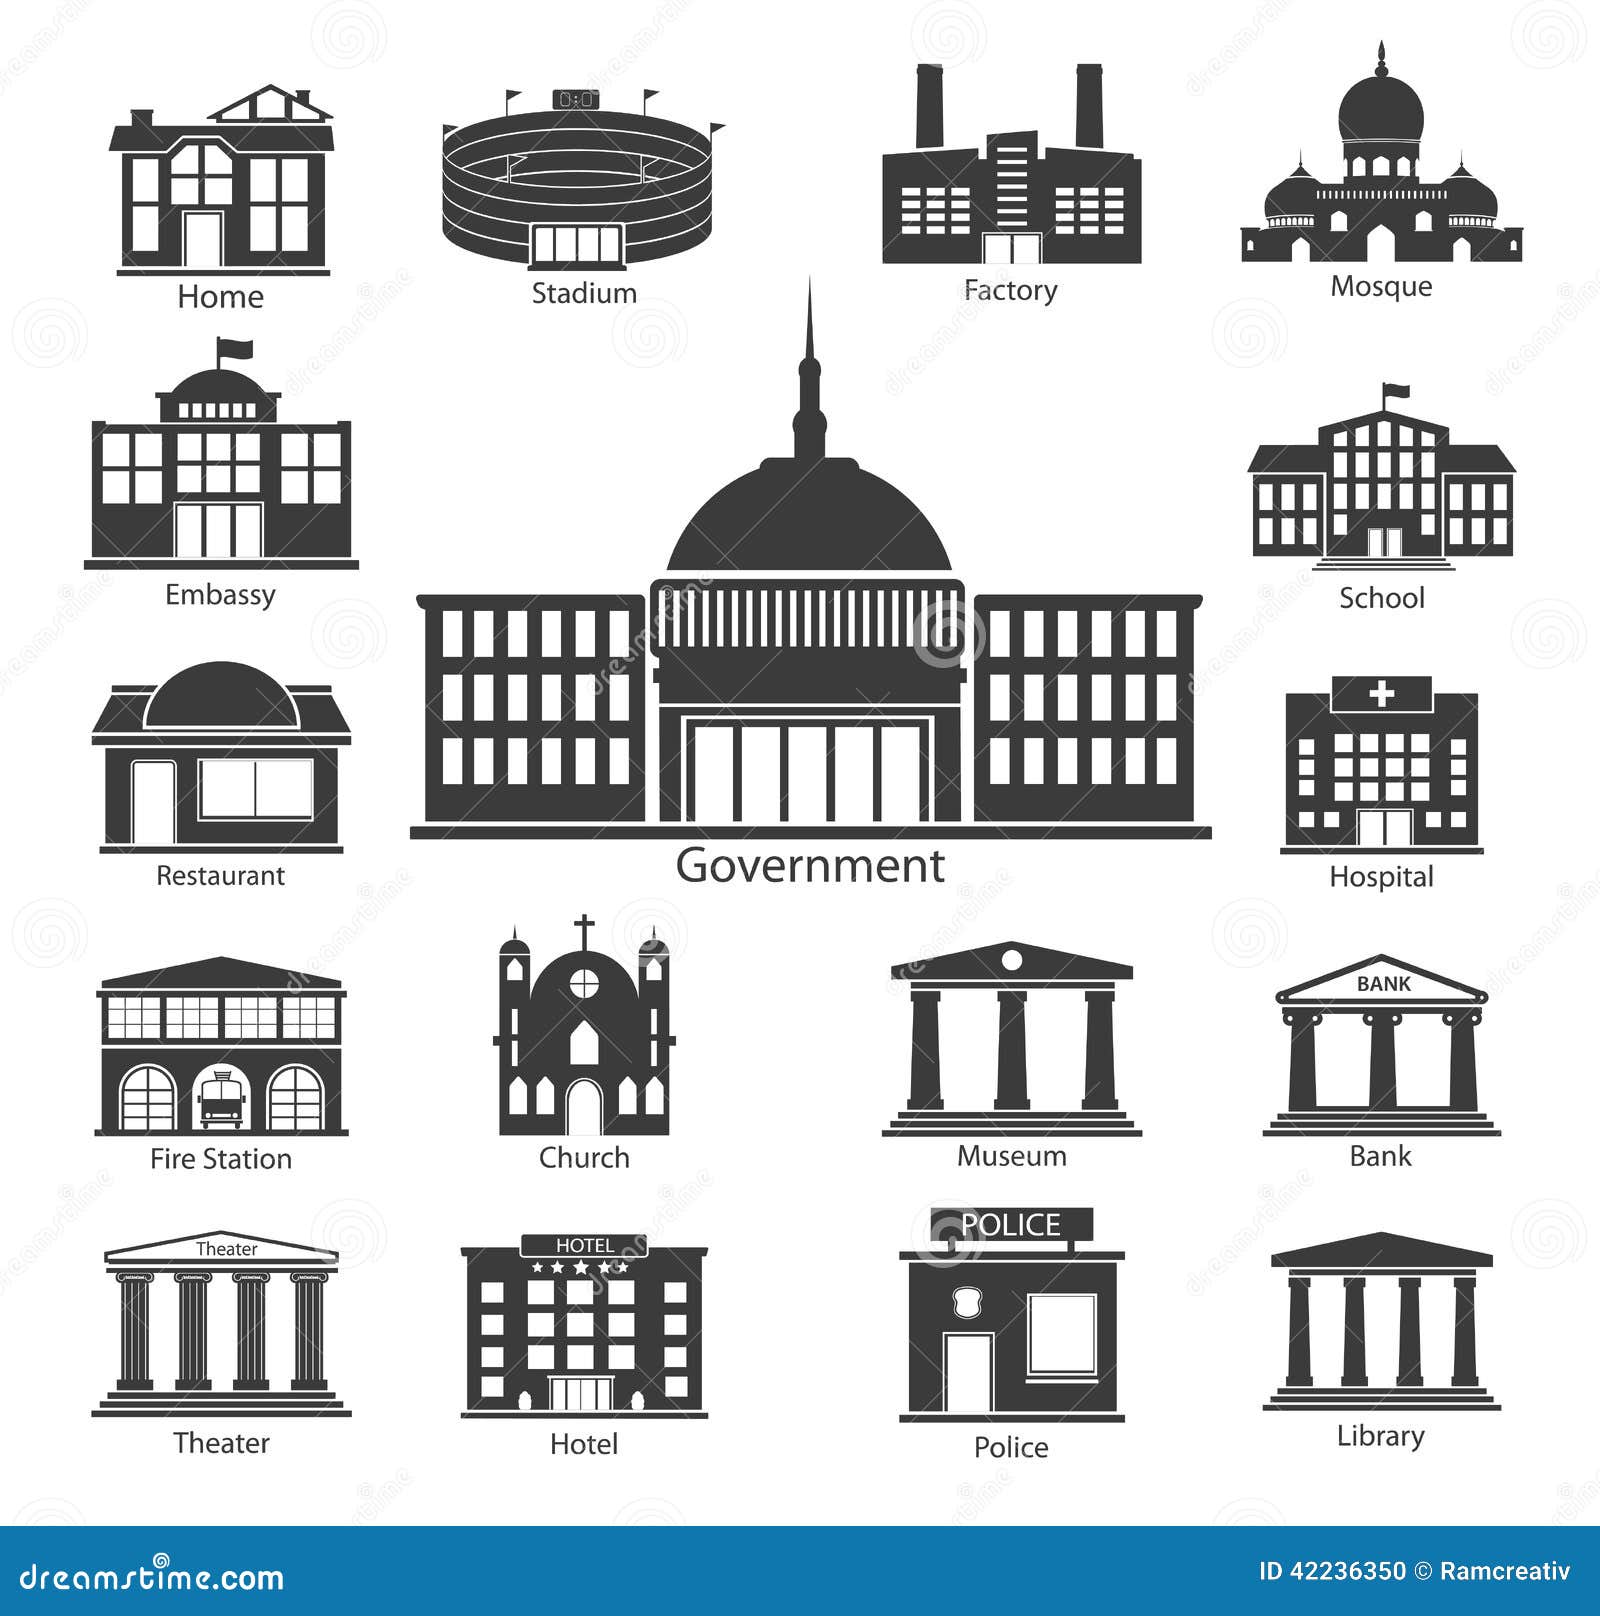 clipart government images - photo #32